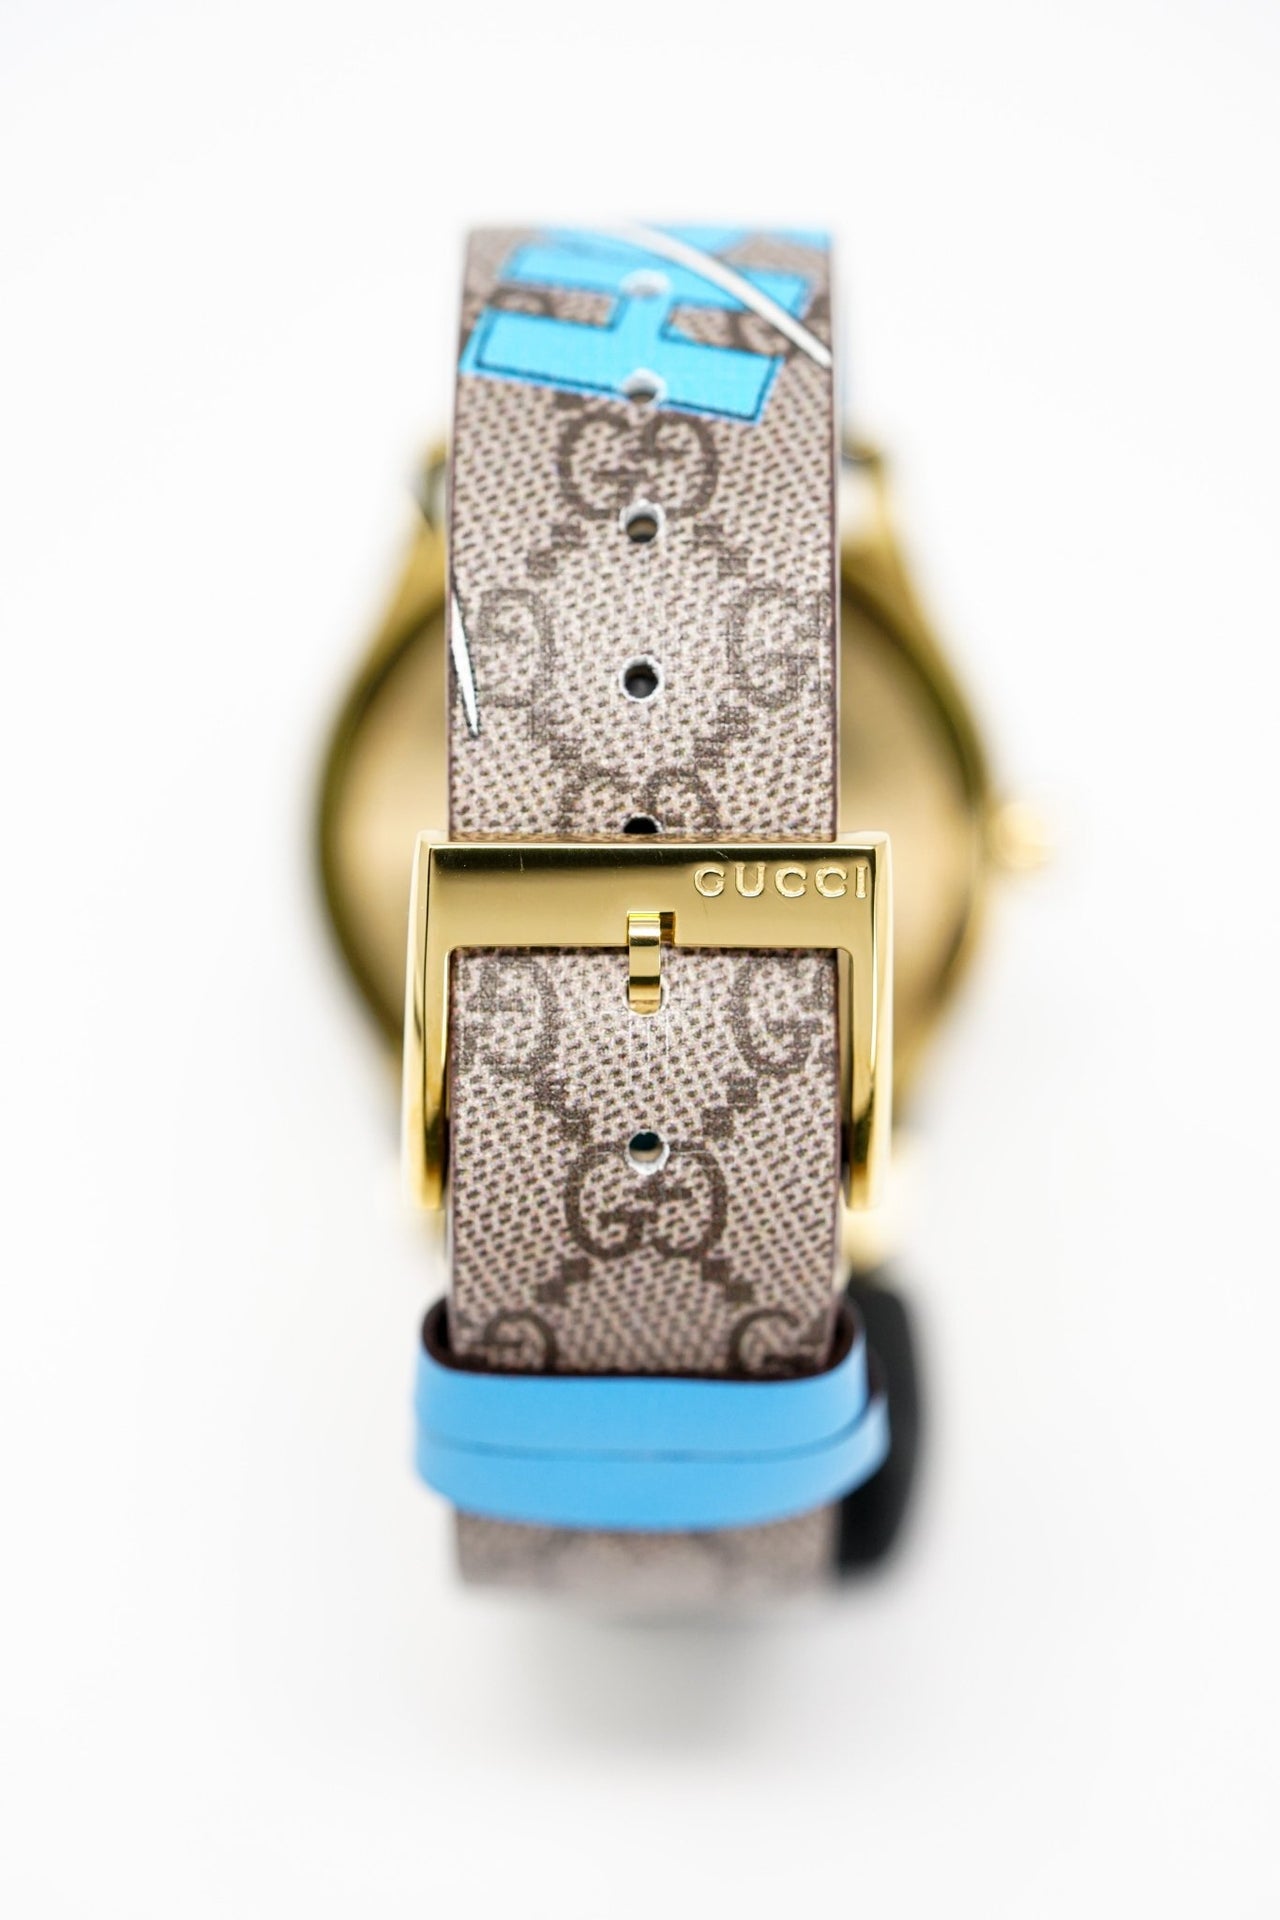 Gucci Watch G-Timeless Disney Donald Duck YA1264167 - Watches & Crystals